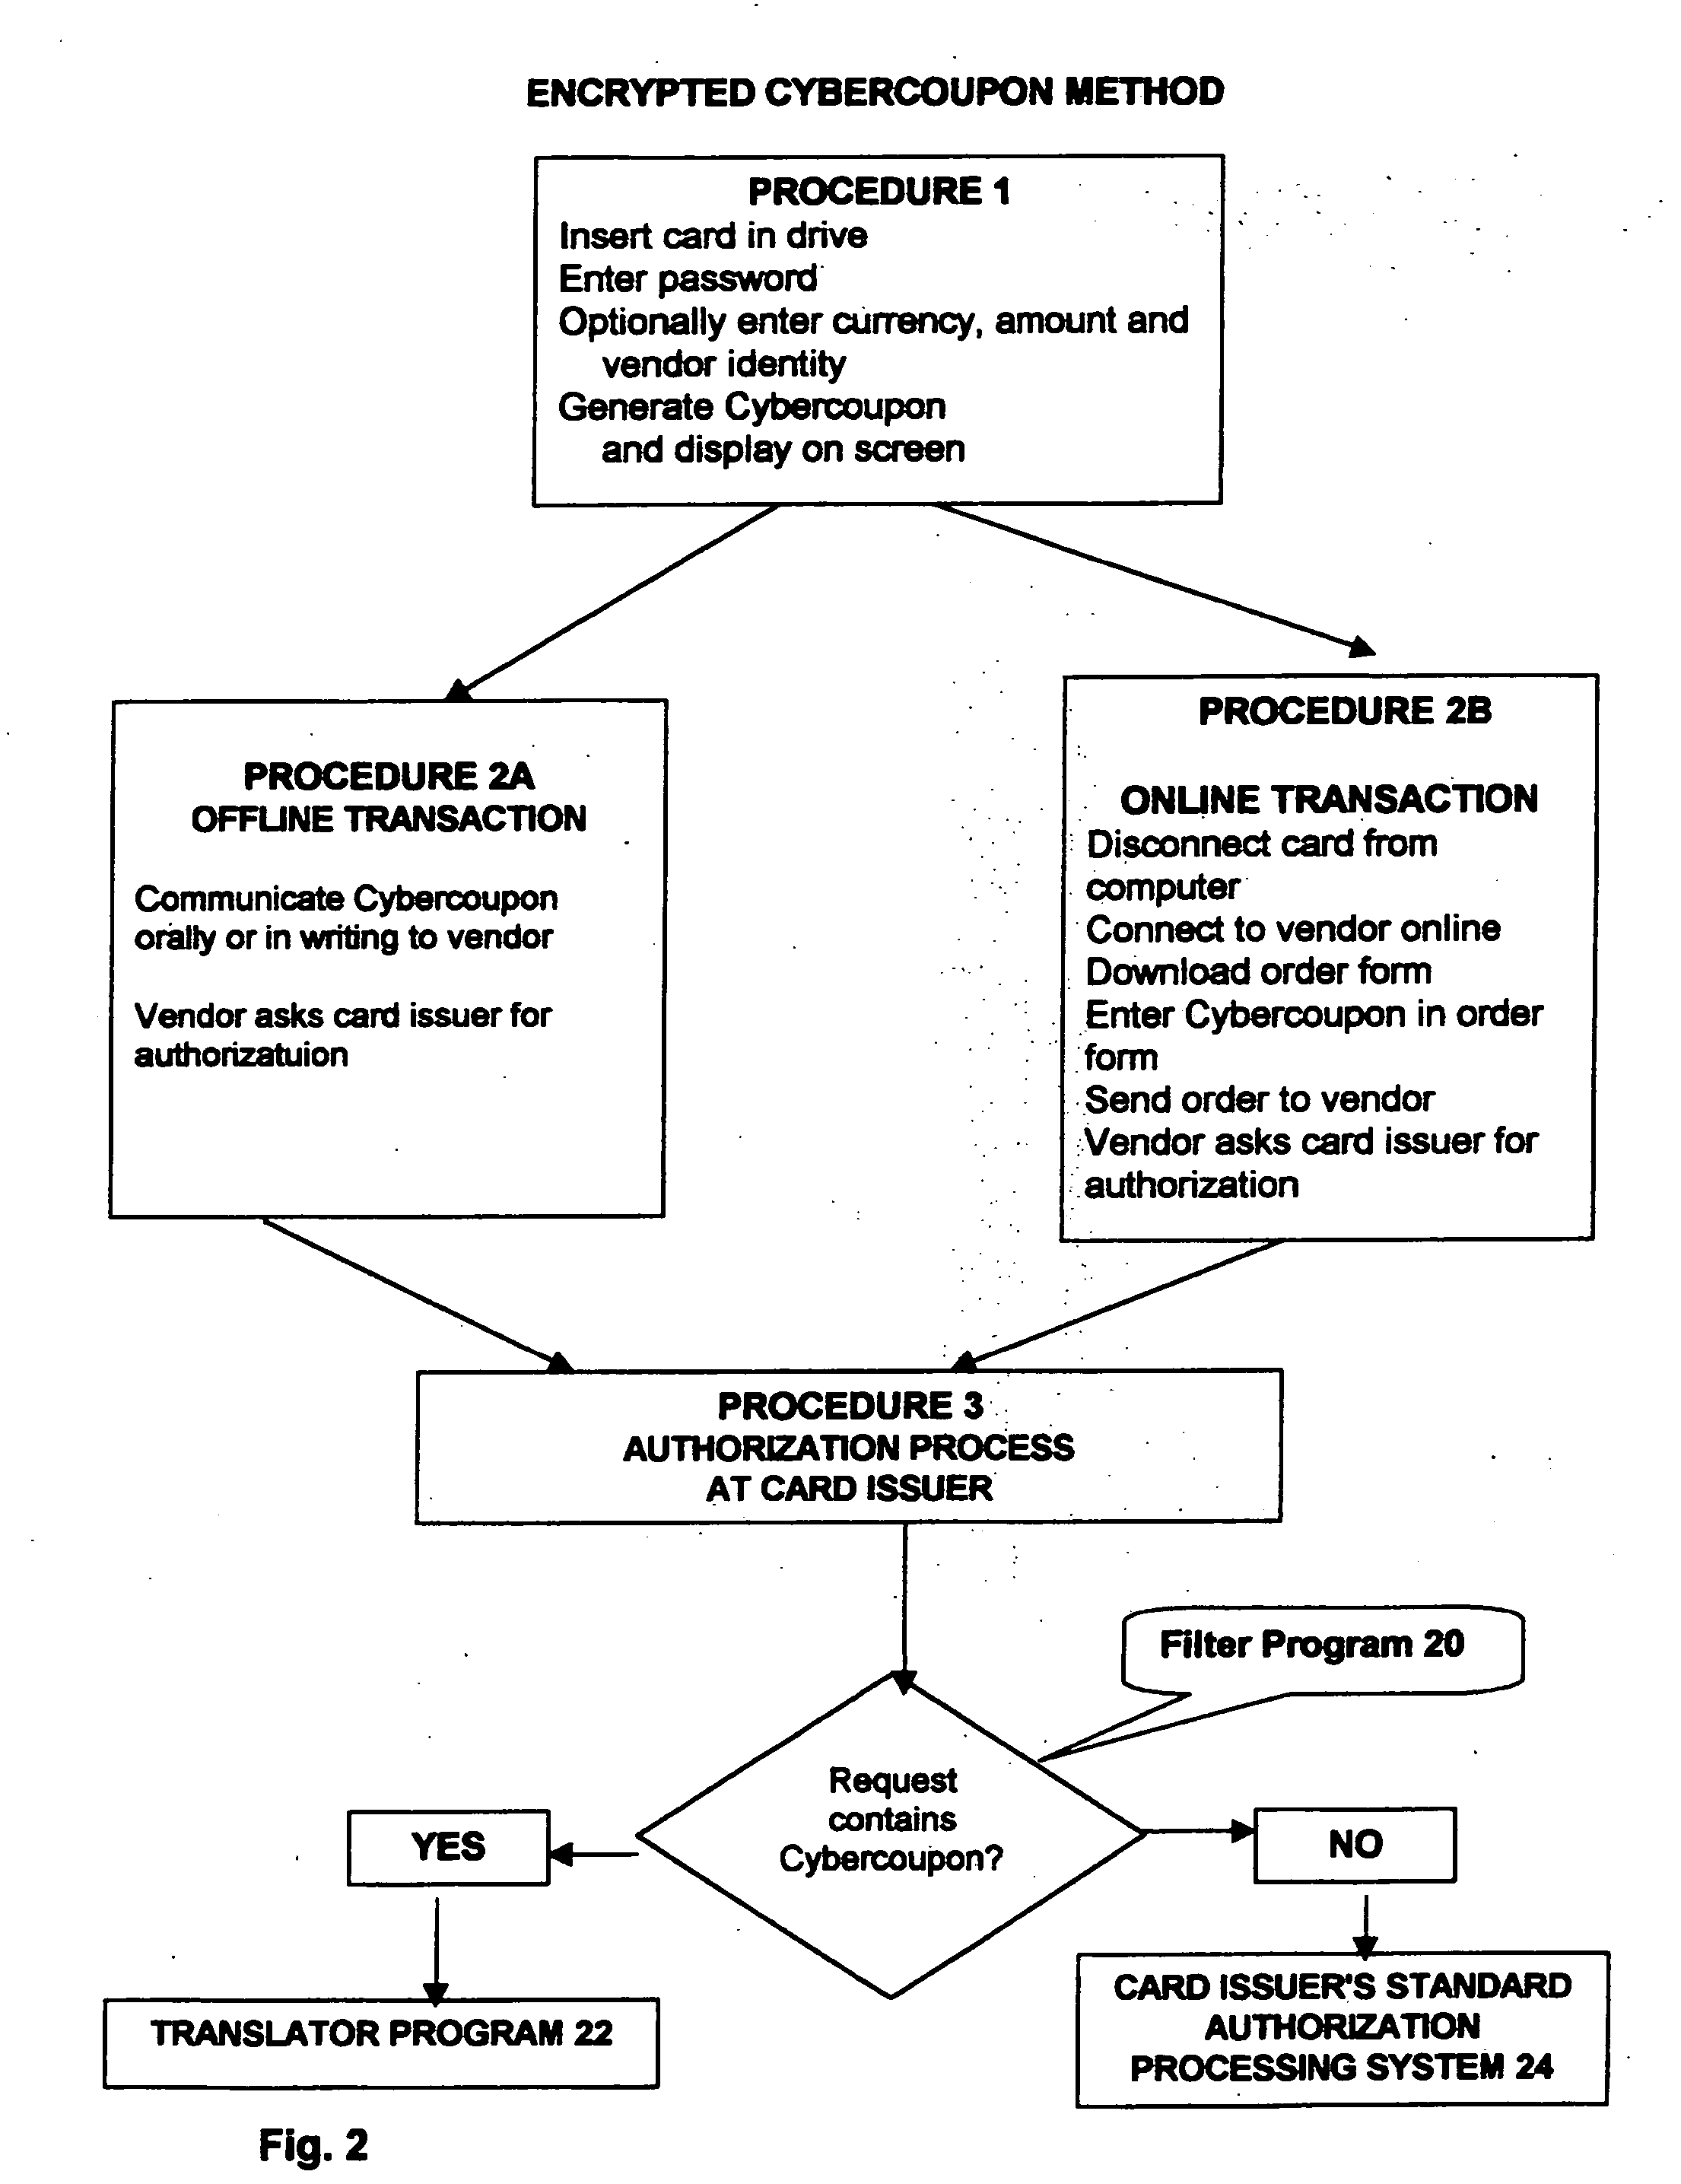 Method and system for preventing fraudulent use of credit cards and credit card information, and for preventing unauthorized access to restricted physical and virtual sites